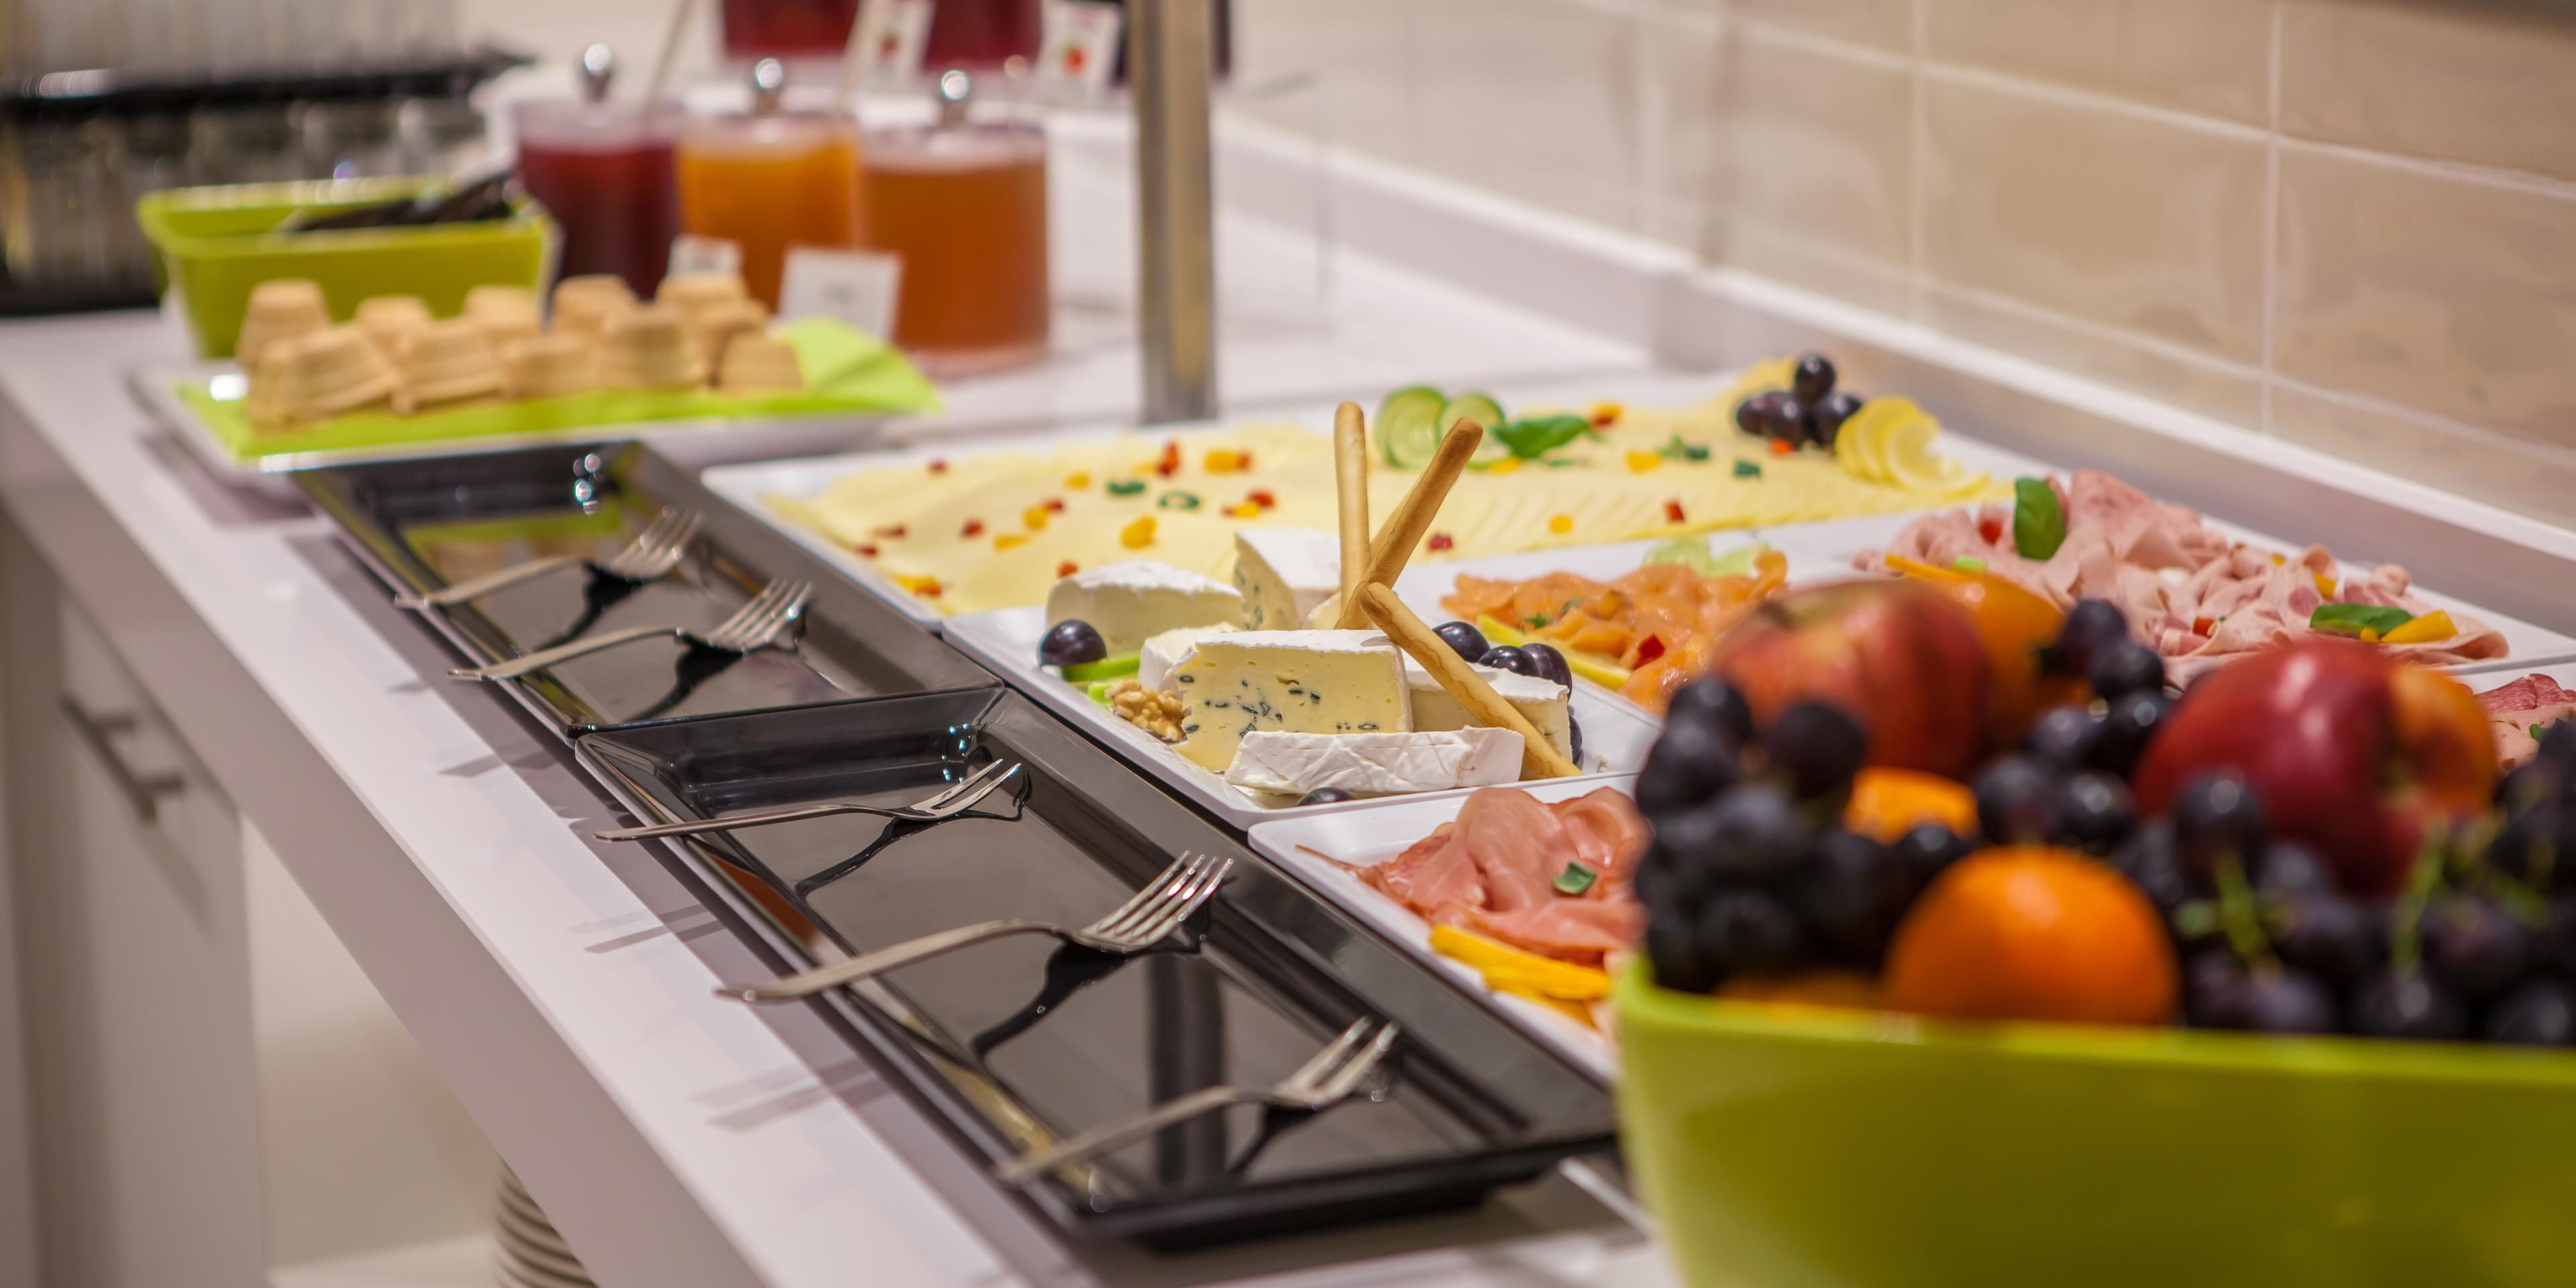 Delicious cold meats and cheeses among the options at breakfast.